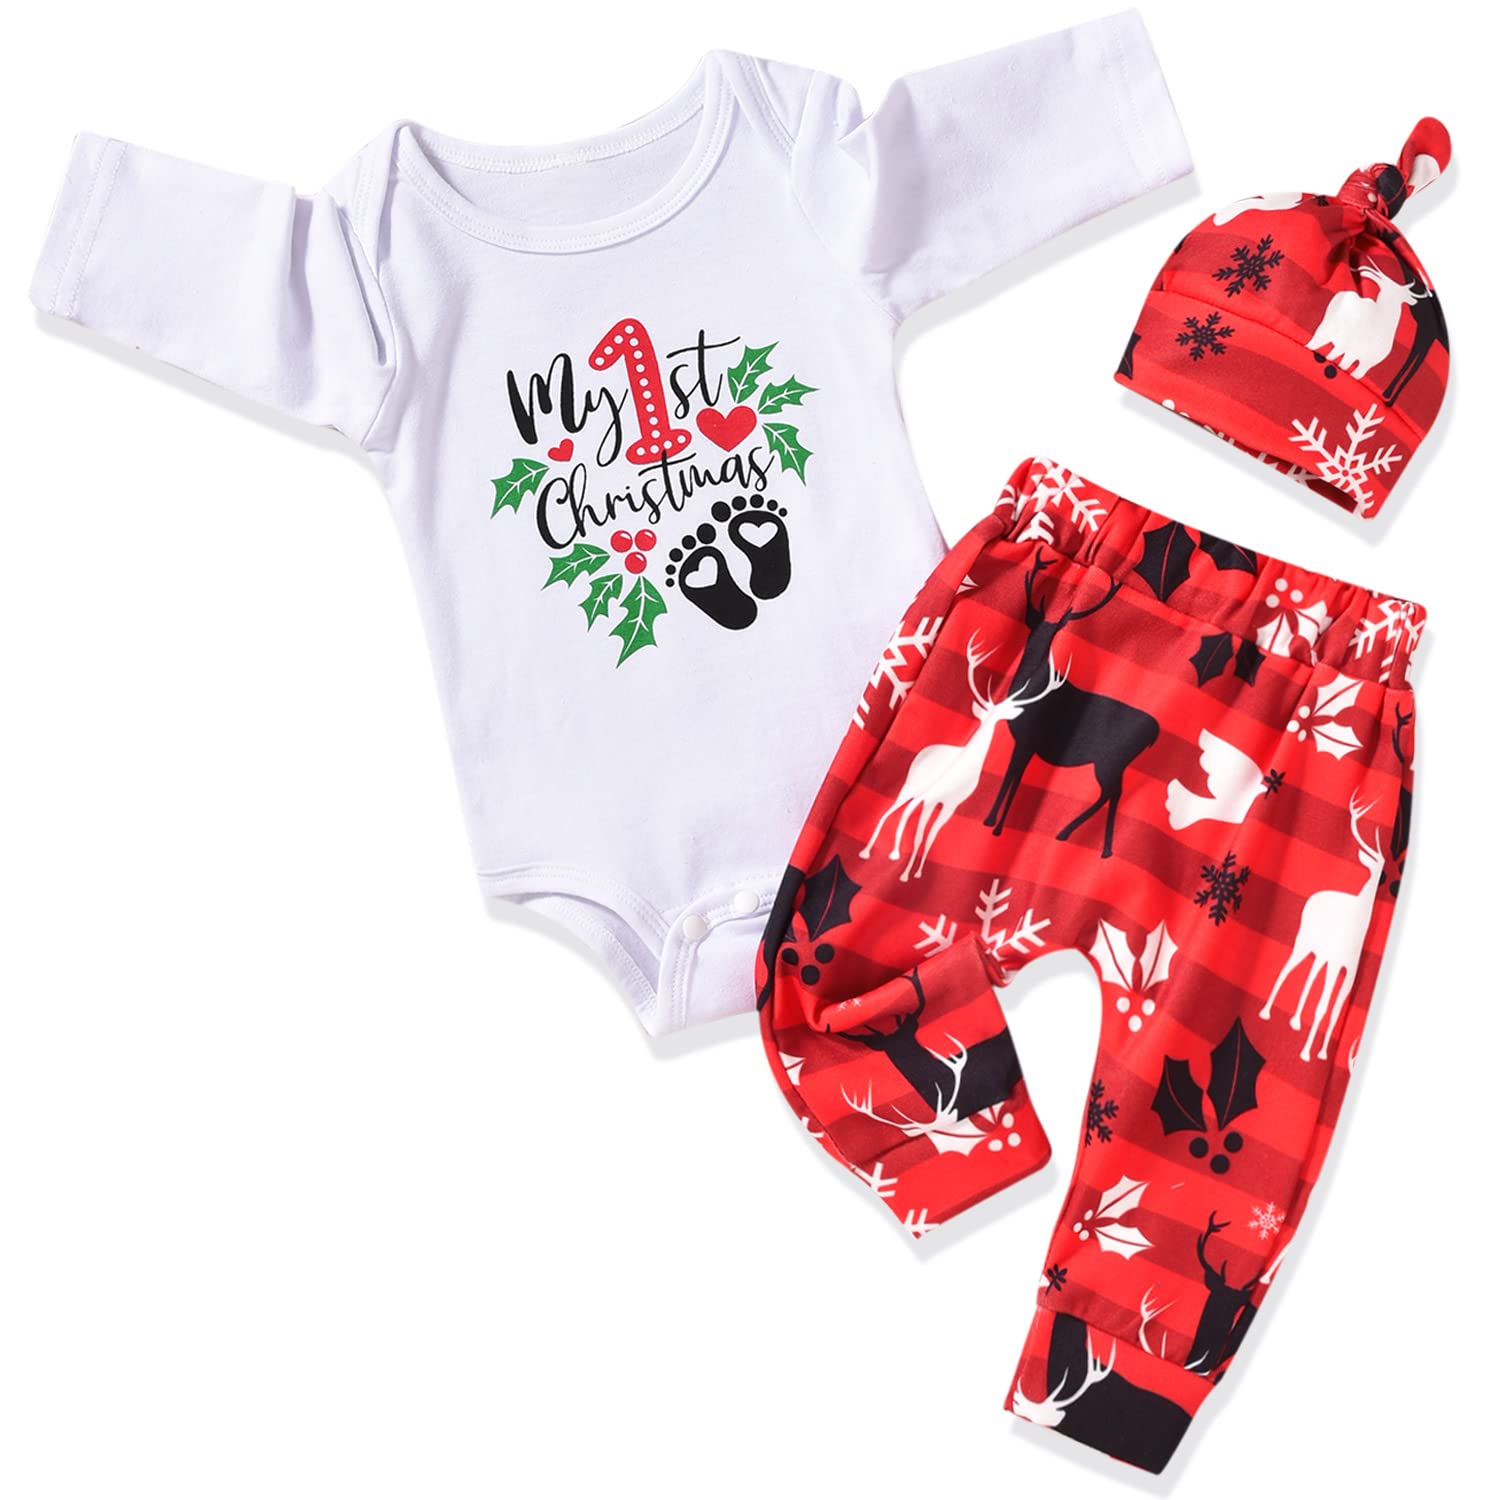 Aalizzwell Newborn Infant Baby Boys Christmas Outfit